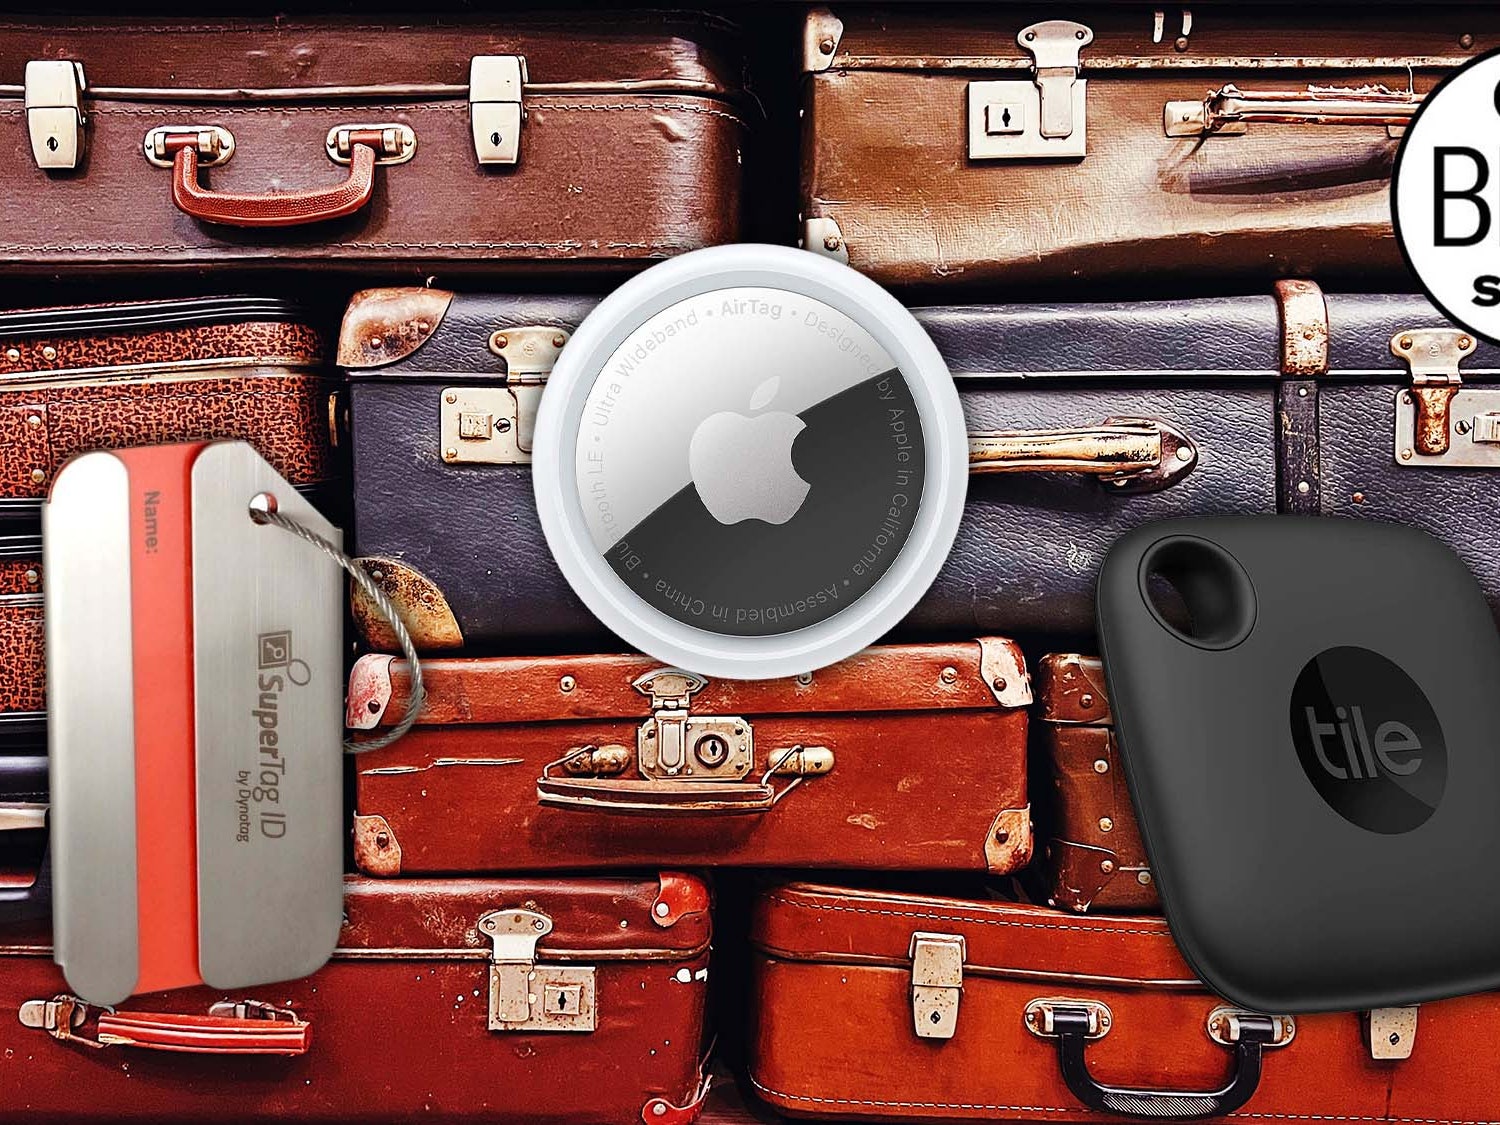 A Luggage Tracker Is the Most Crucial Travel Accessory